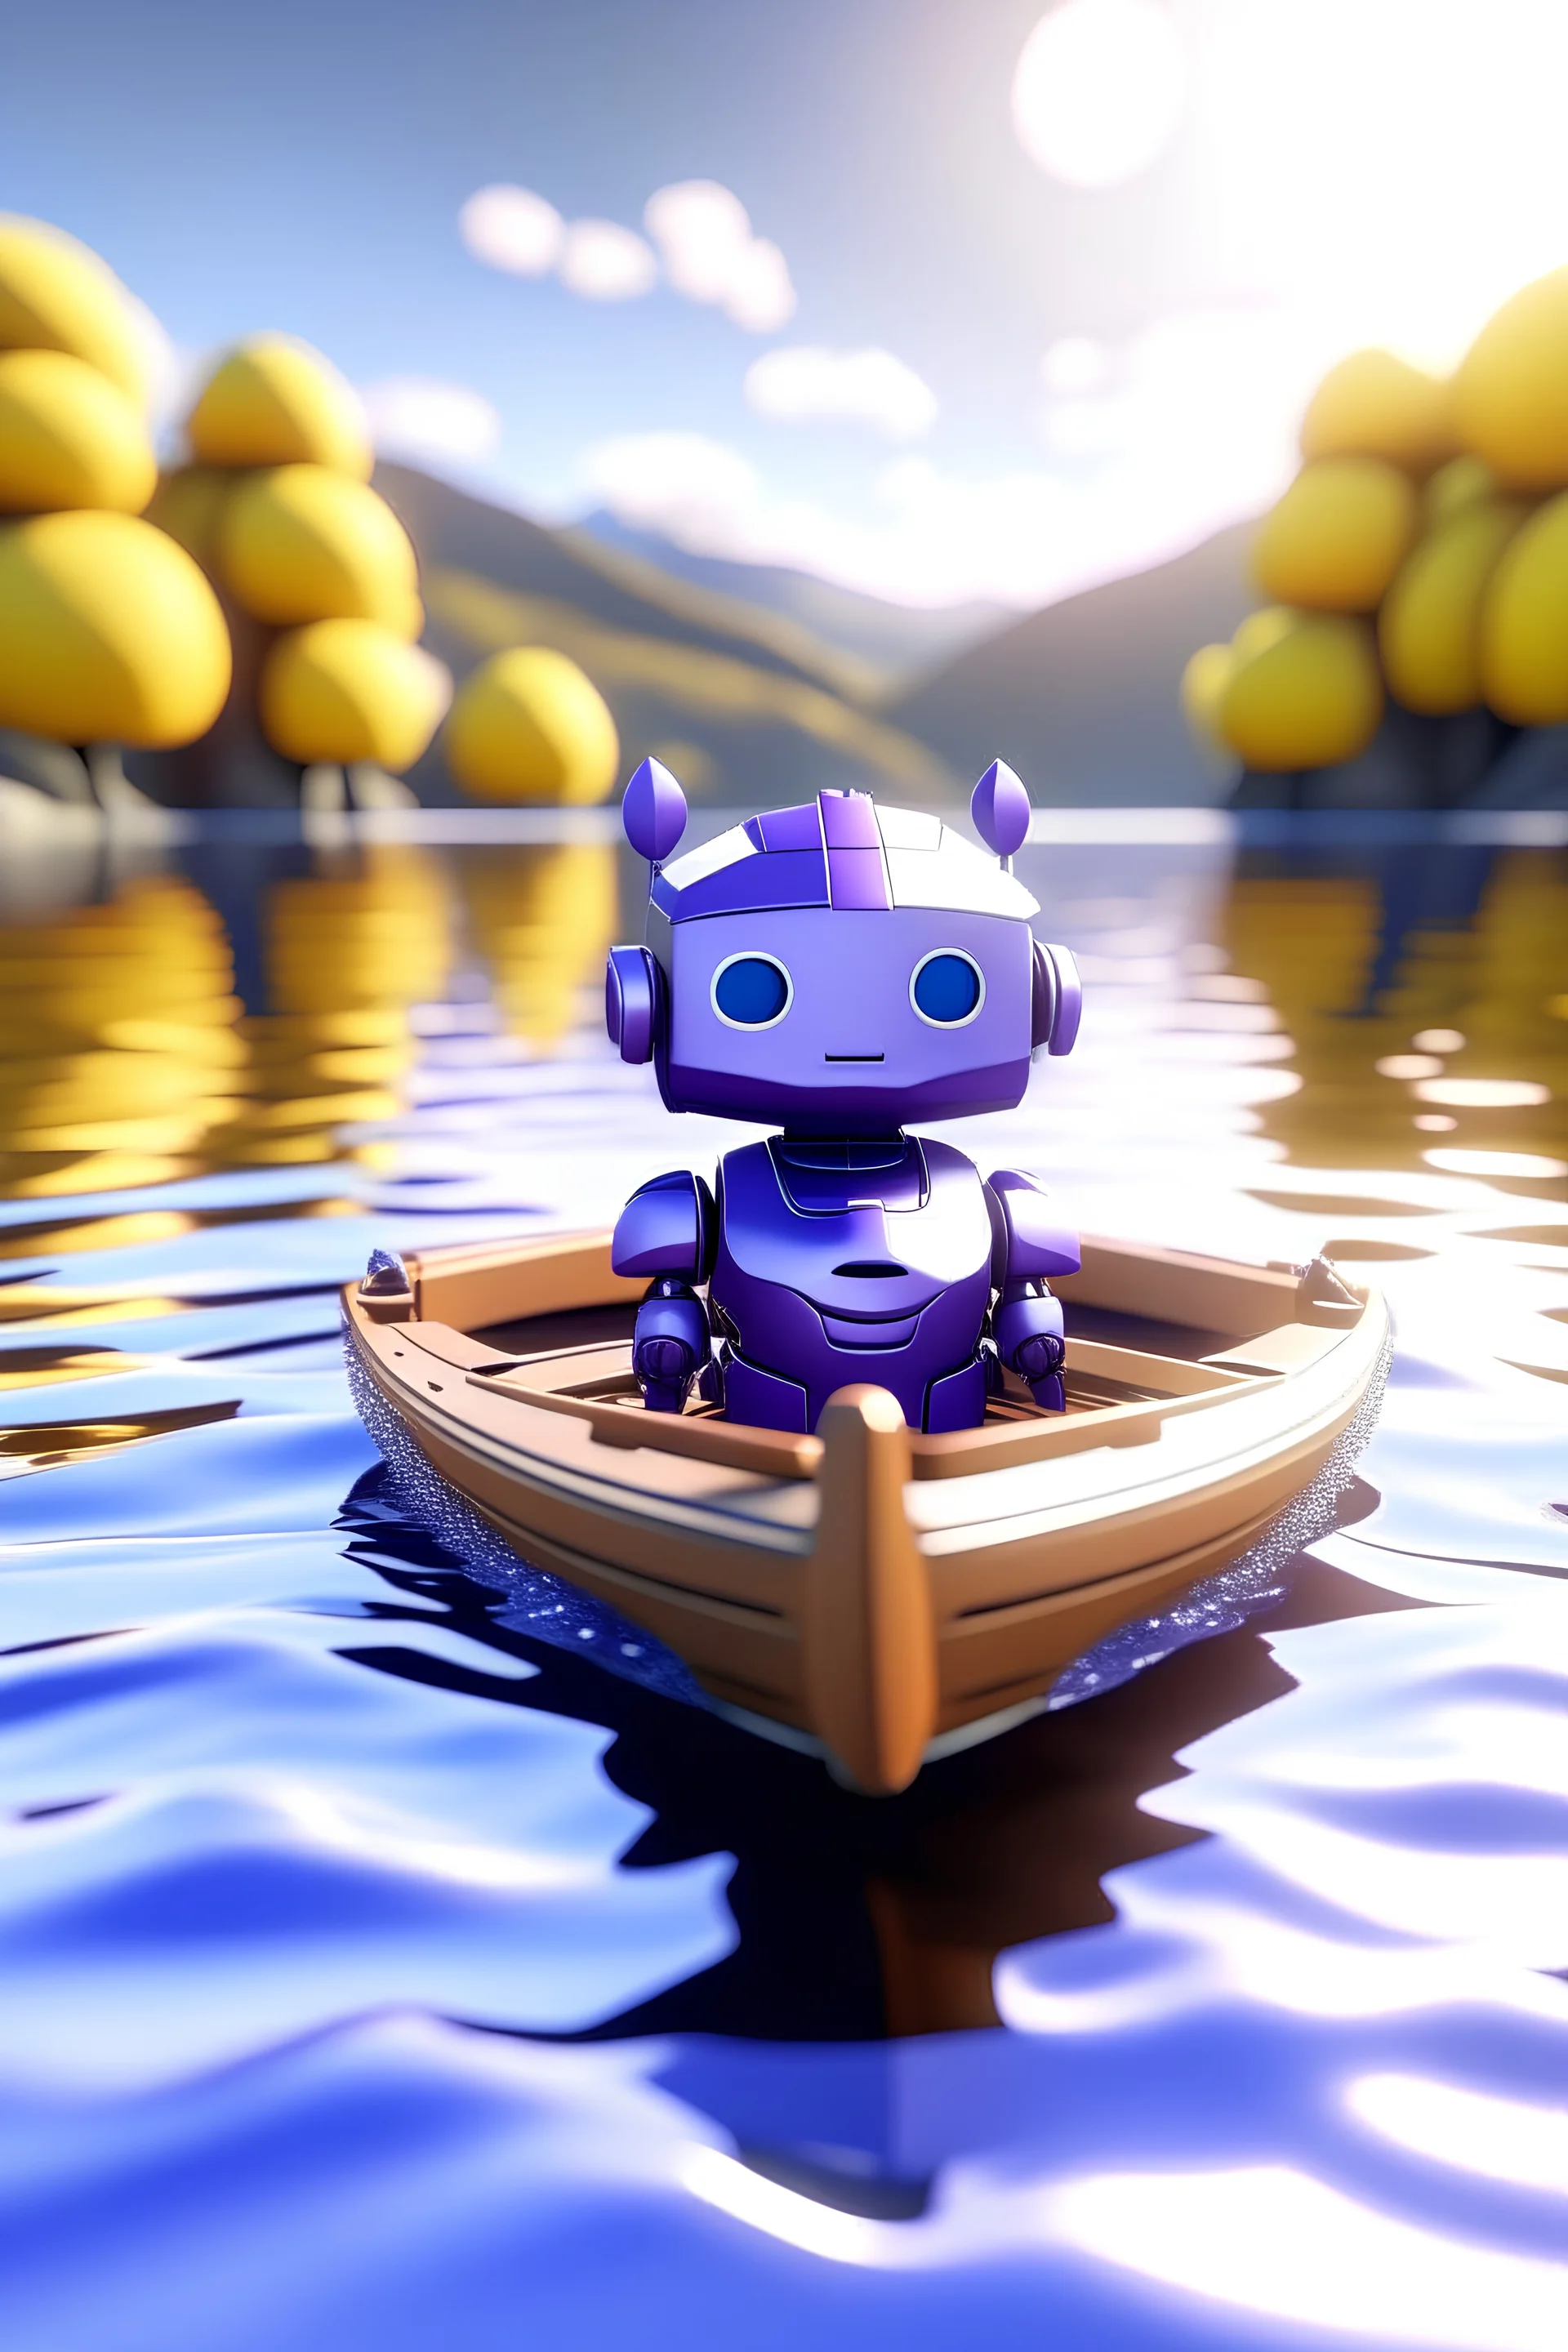 Chibi purple metallic robot enjoying a row boat ride in the middle of the lake on a sunny day